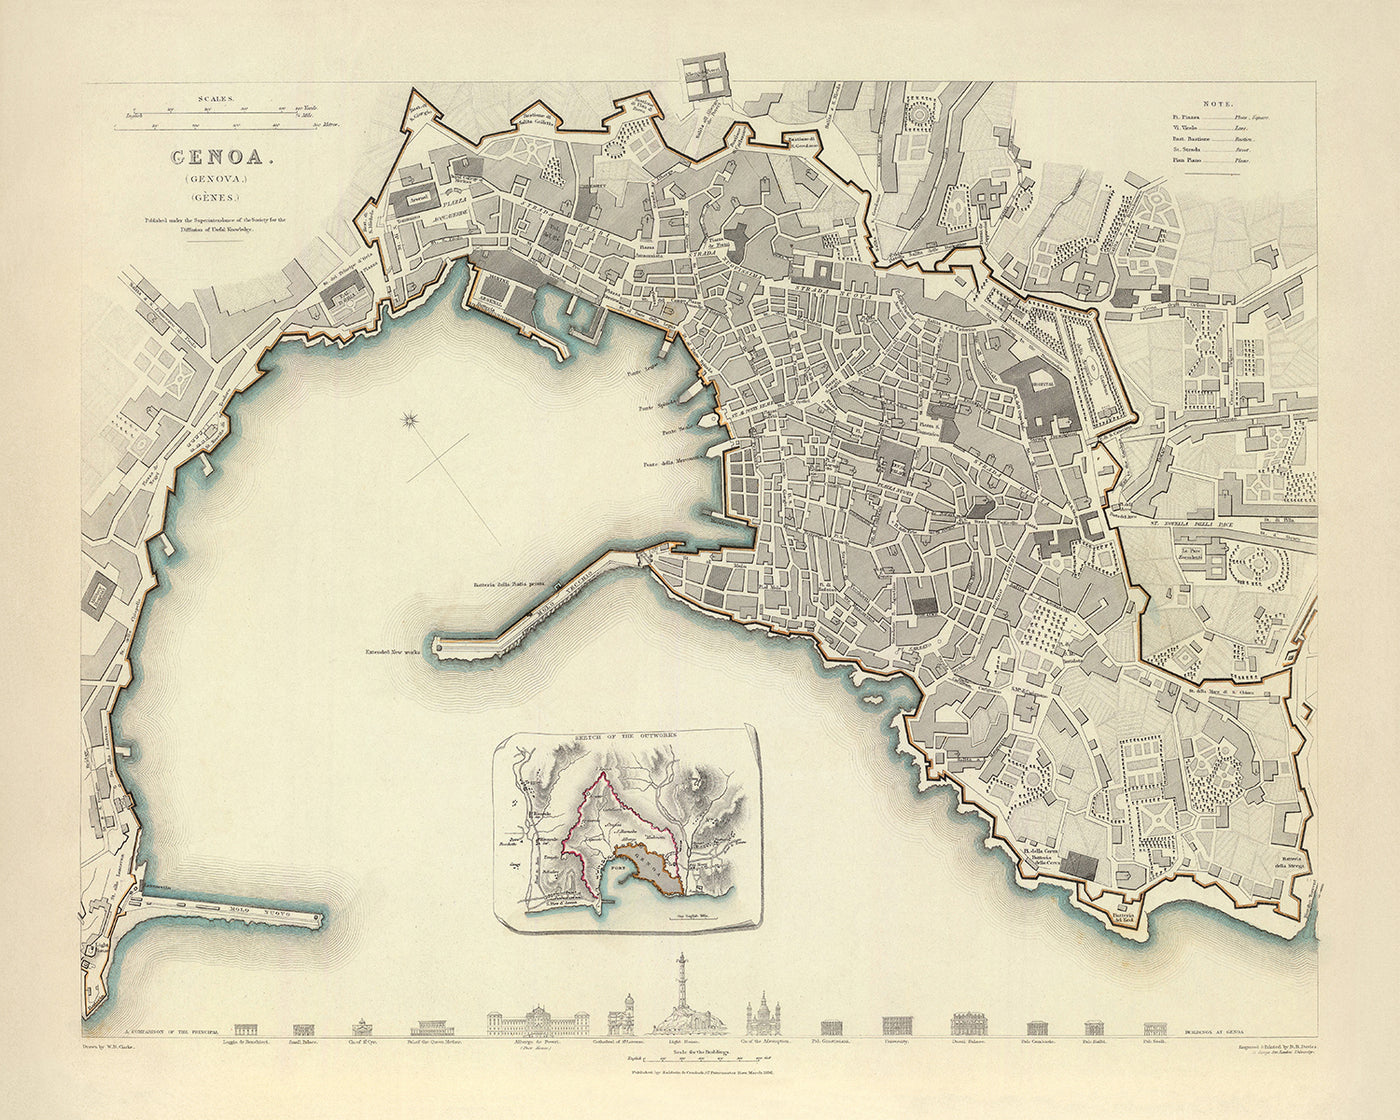 Old Map of Genoa by Clarke, 1836: Cathedral, Palazzo Ducale, Lighthouse, Carlo Felice Theatre, University